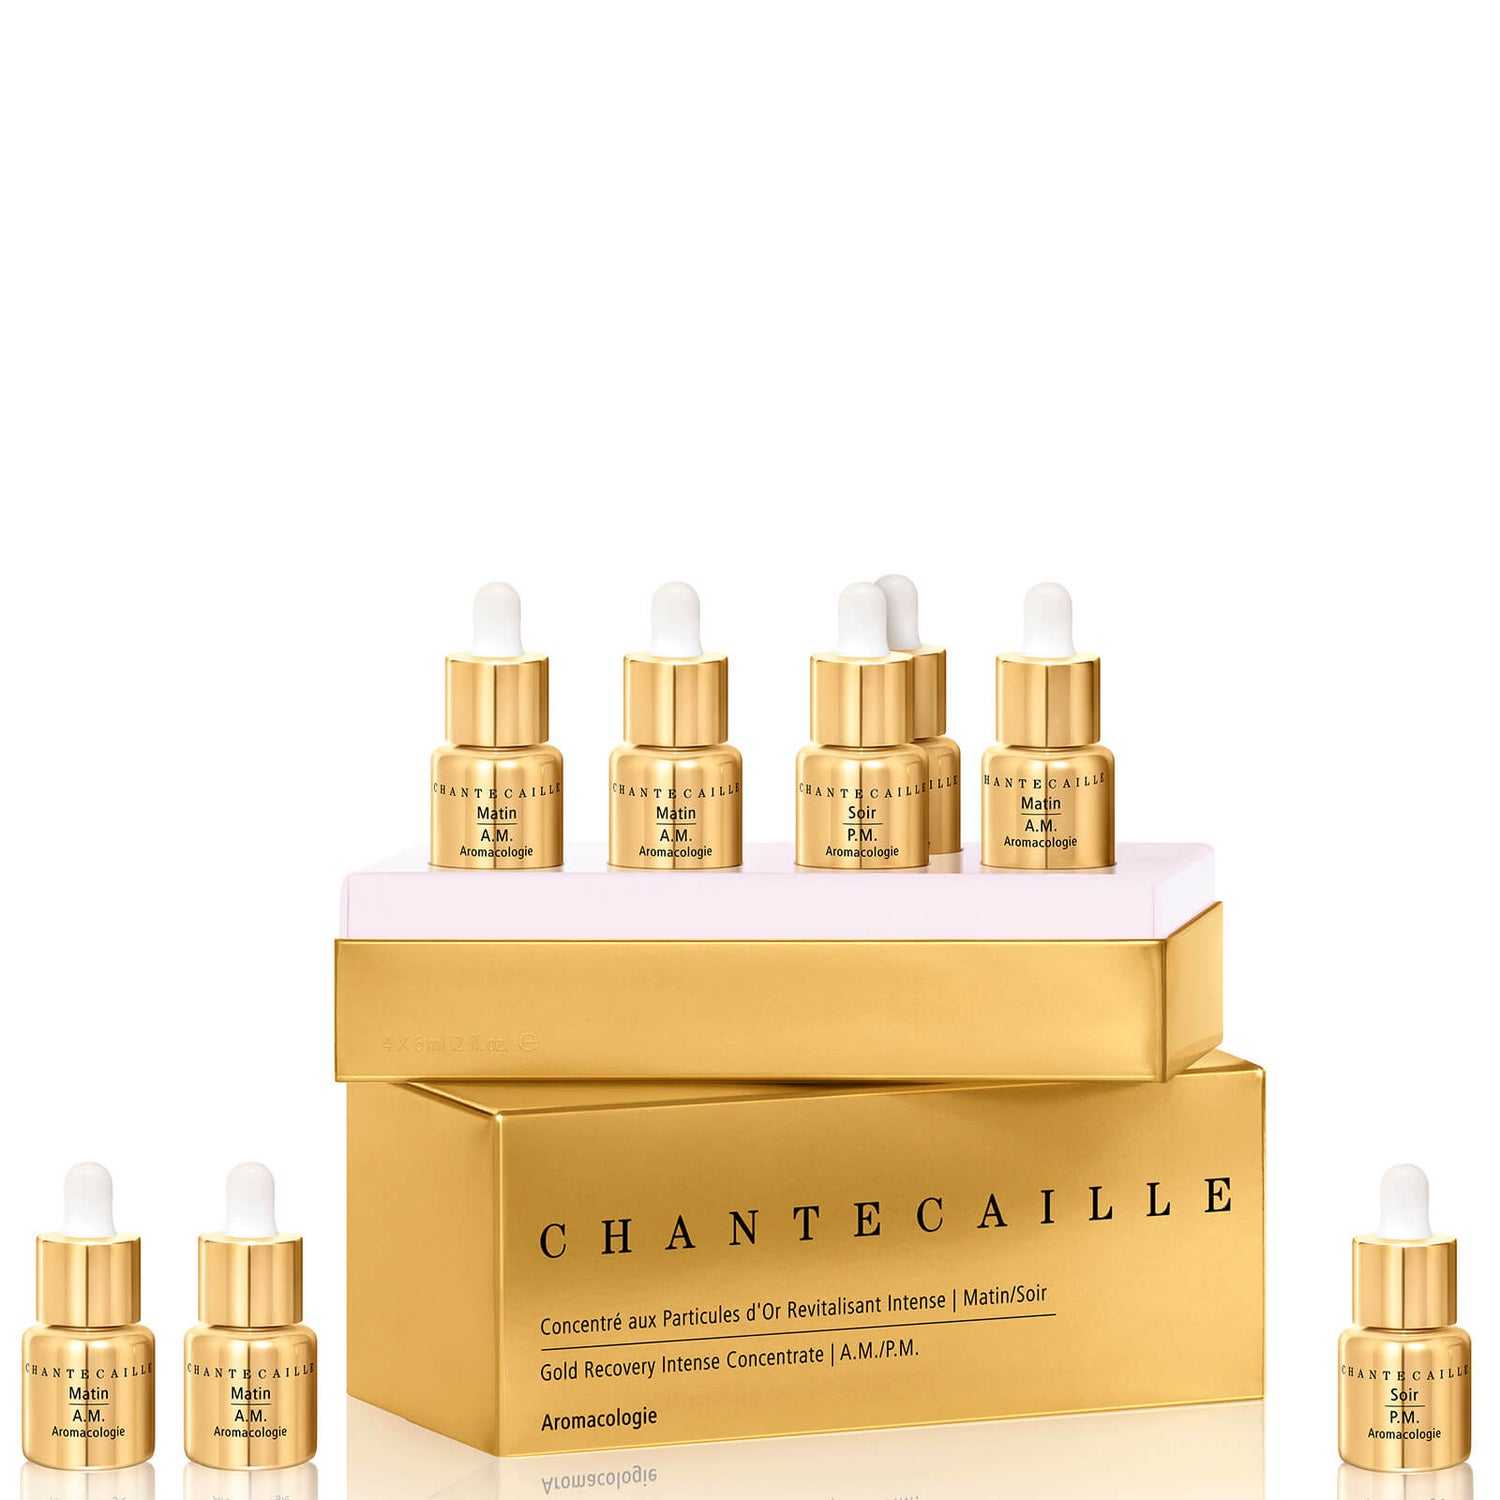 Chantecaille Gold Recovery Intense Concentrate AM/PM